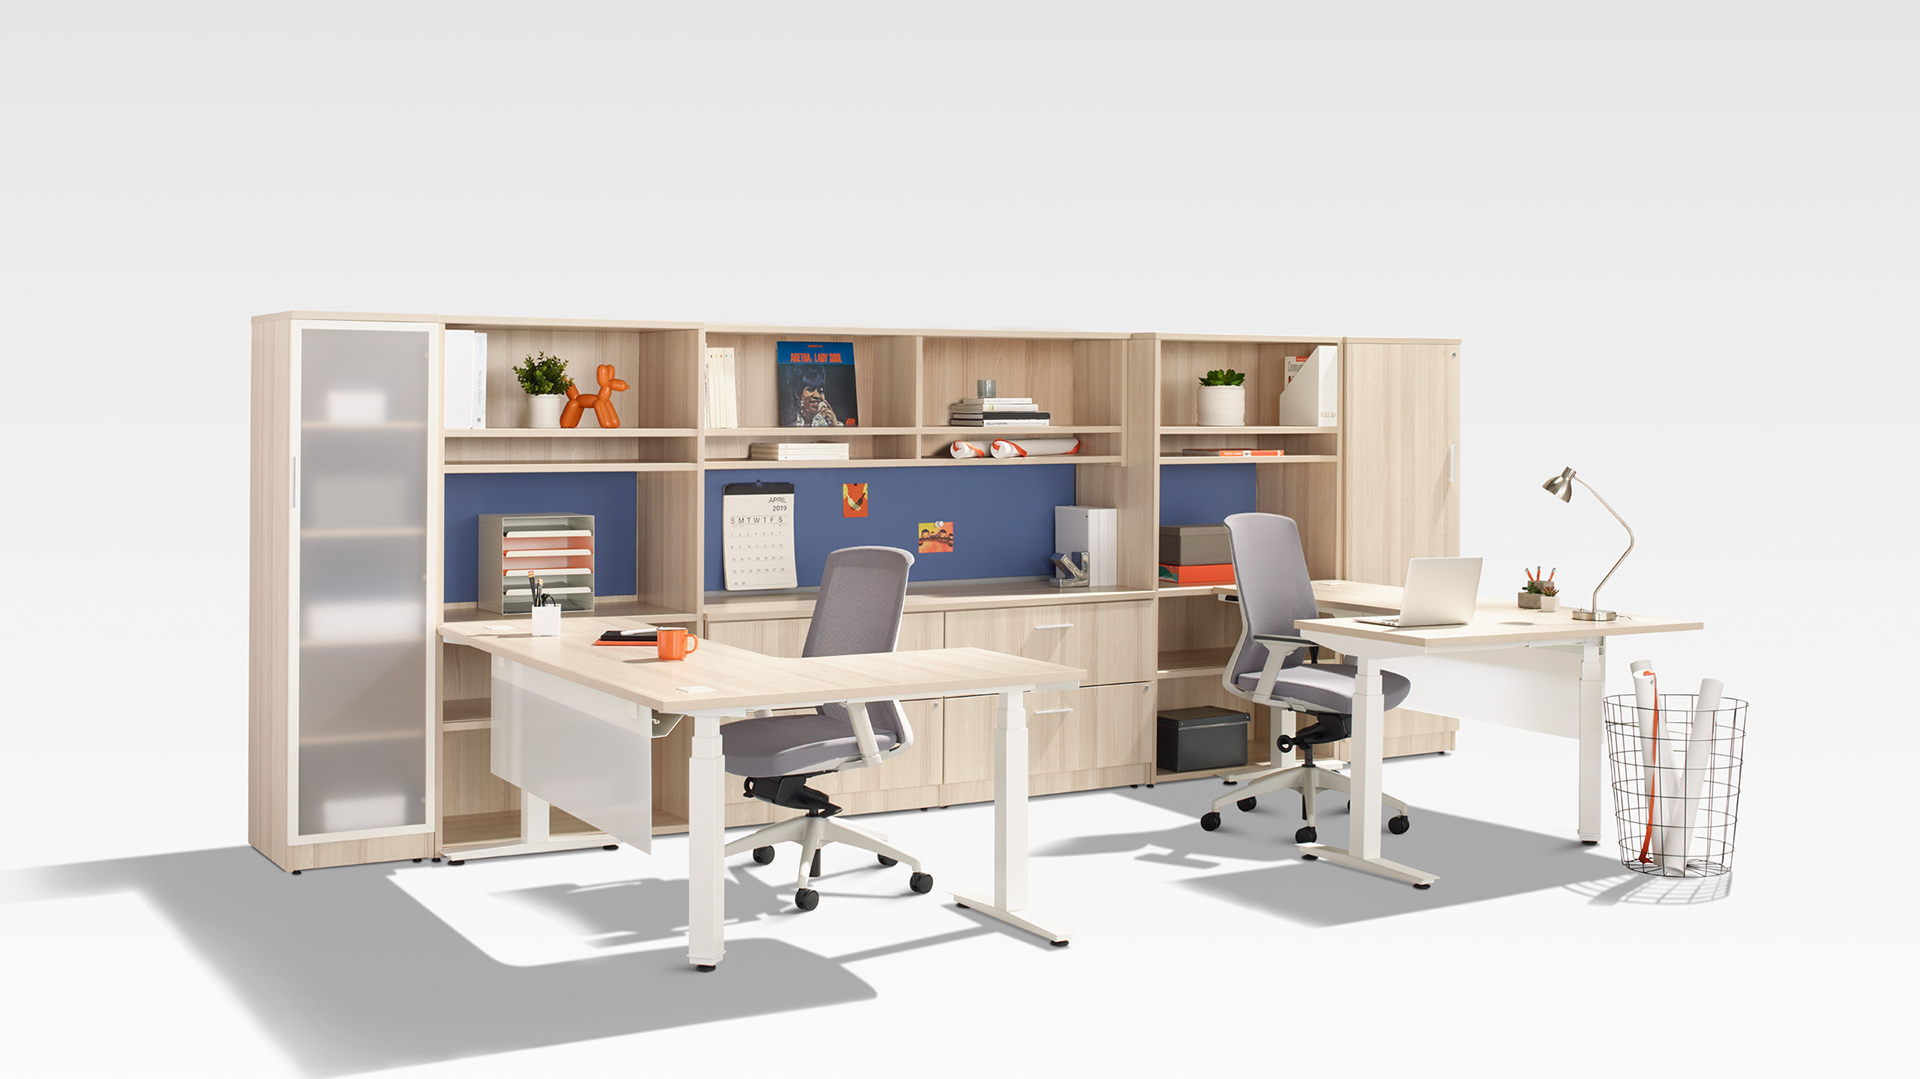 <h1>Colour Theory in Office Furniture Design</h1>